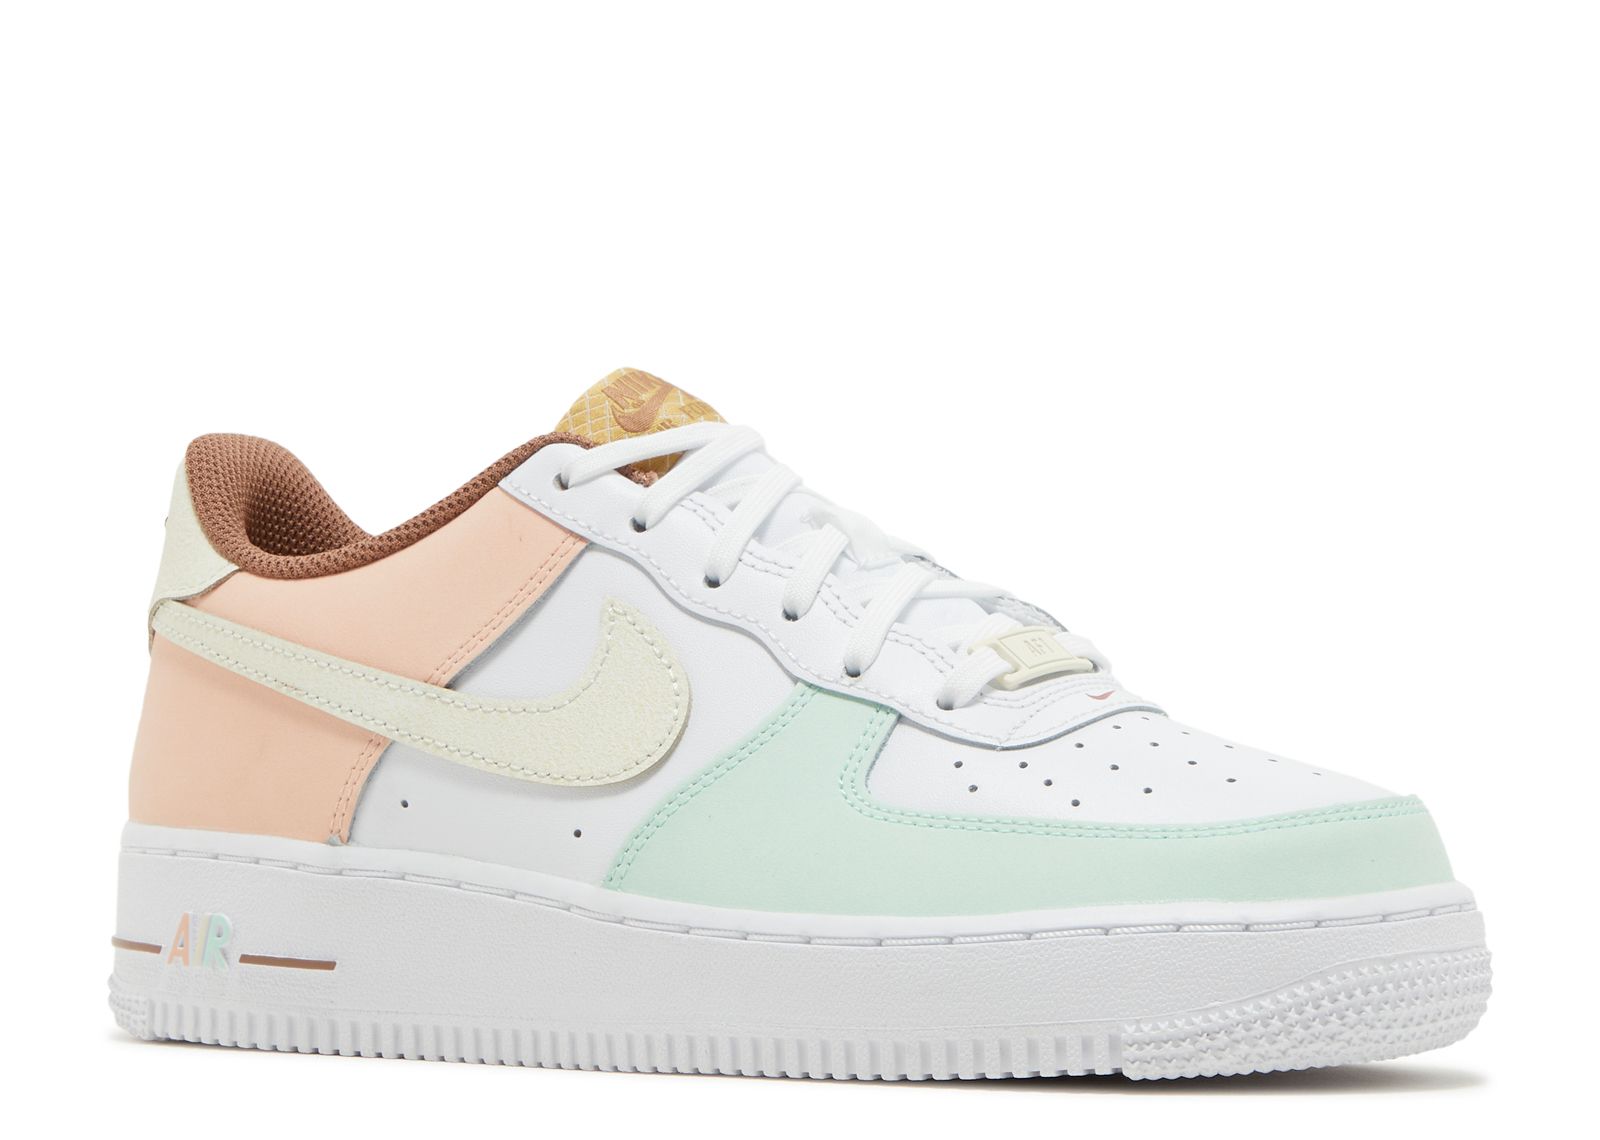 Nike Air Force 1 Low LV8 Ice Cream GS 7Y / Women's Size 8.5 DX3727